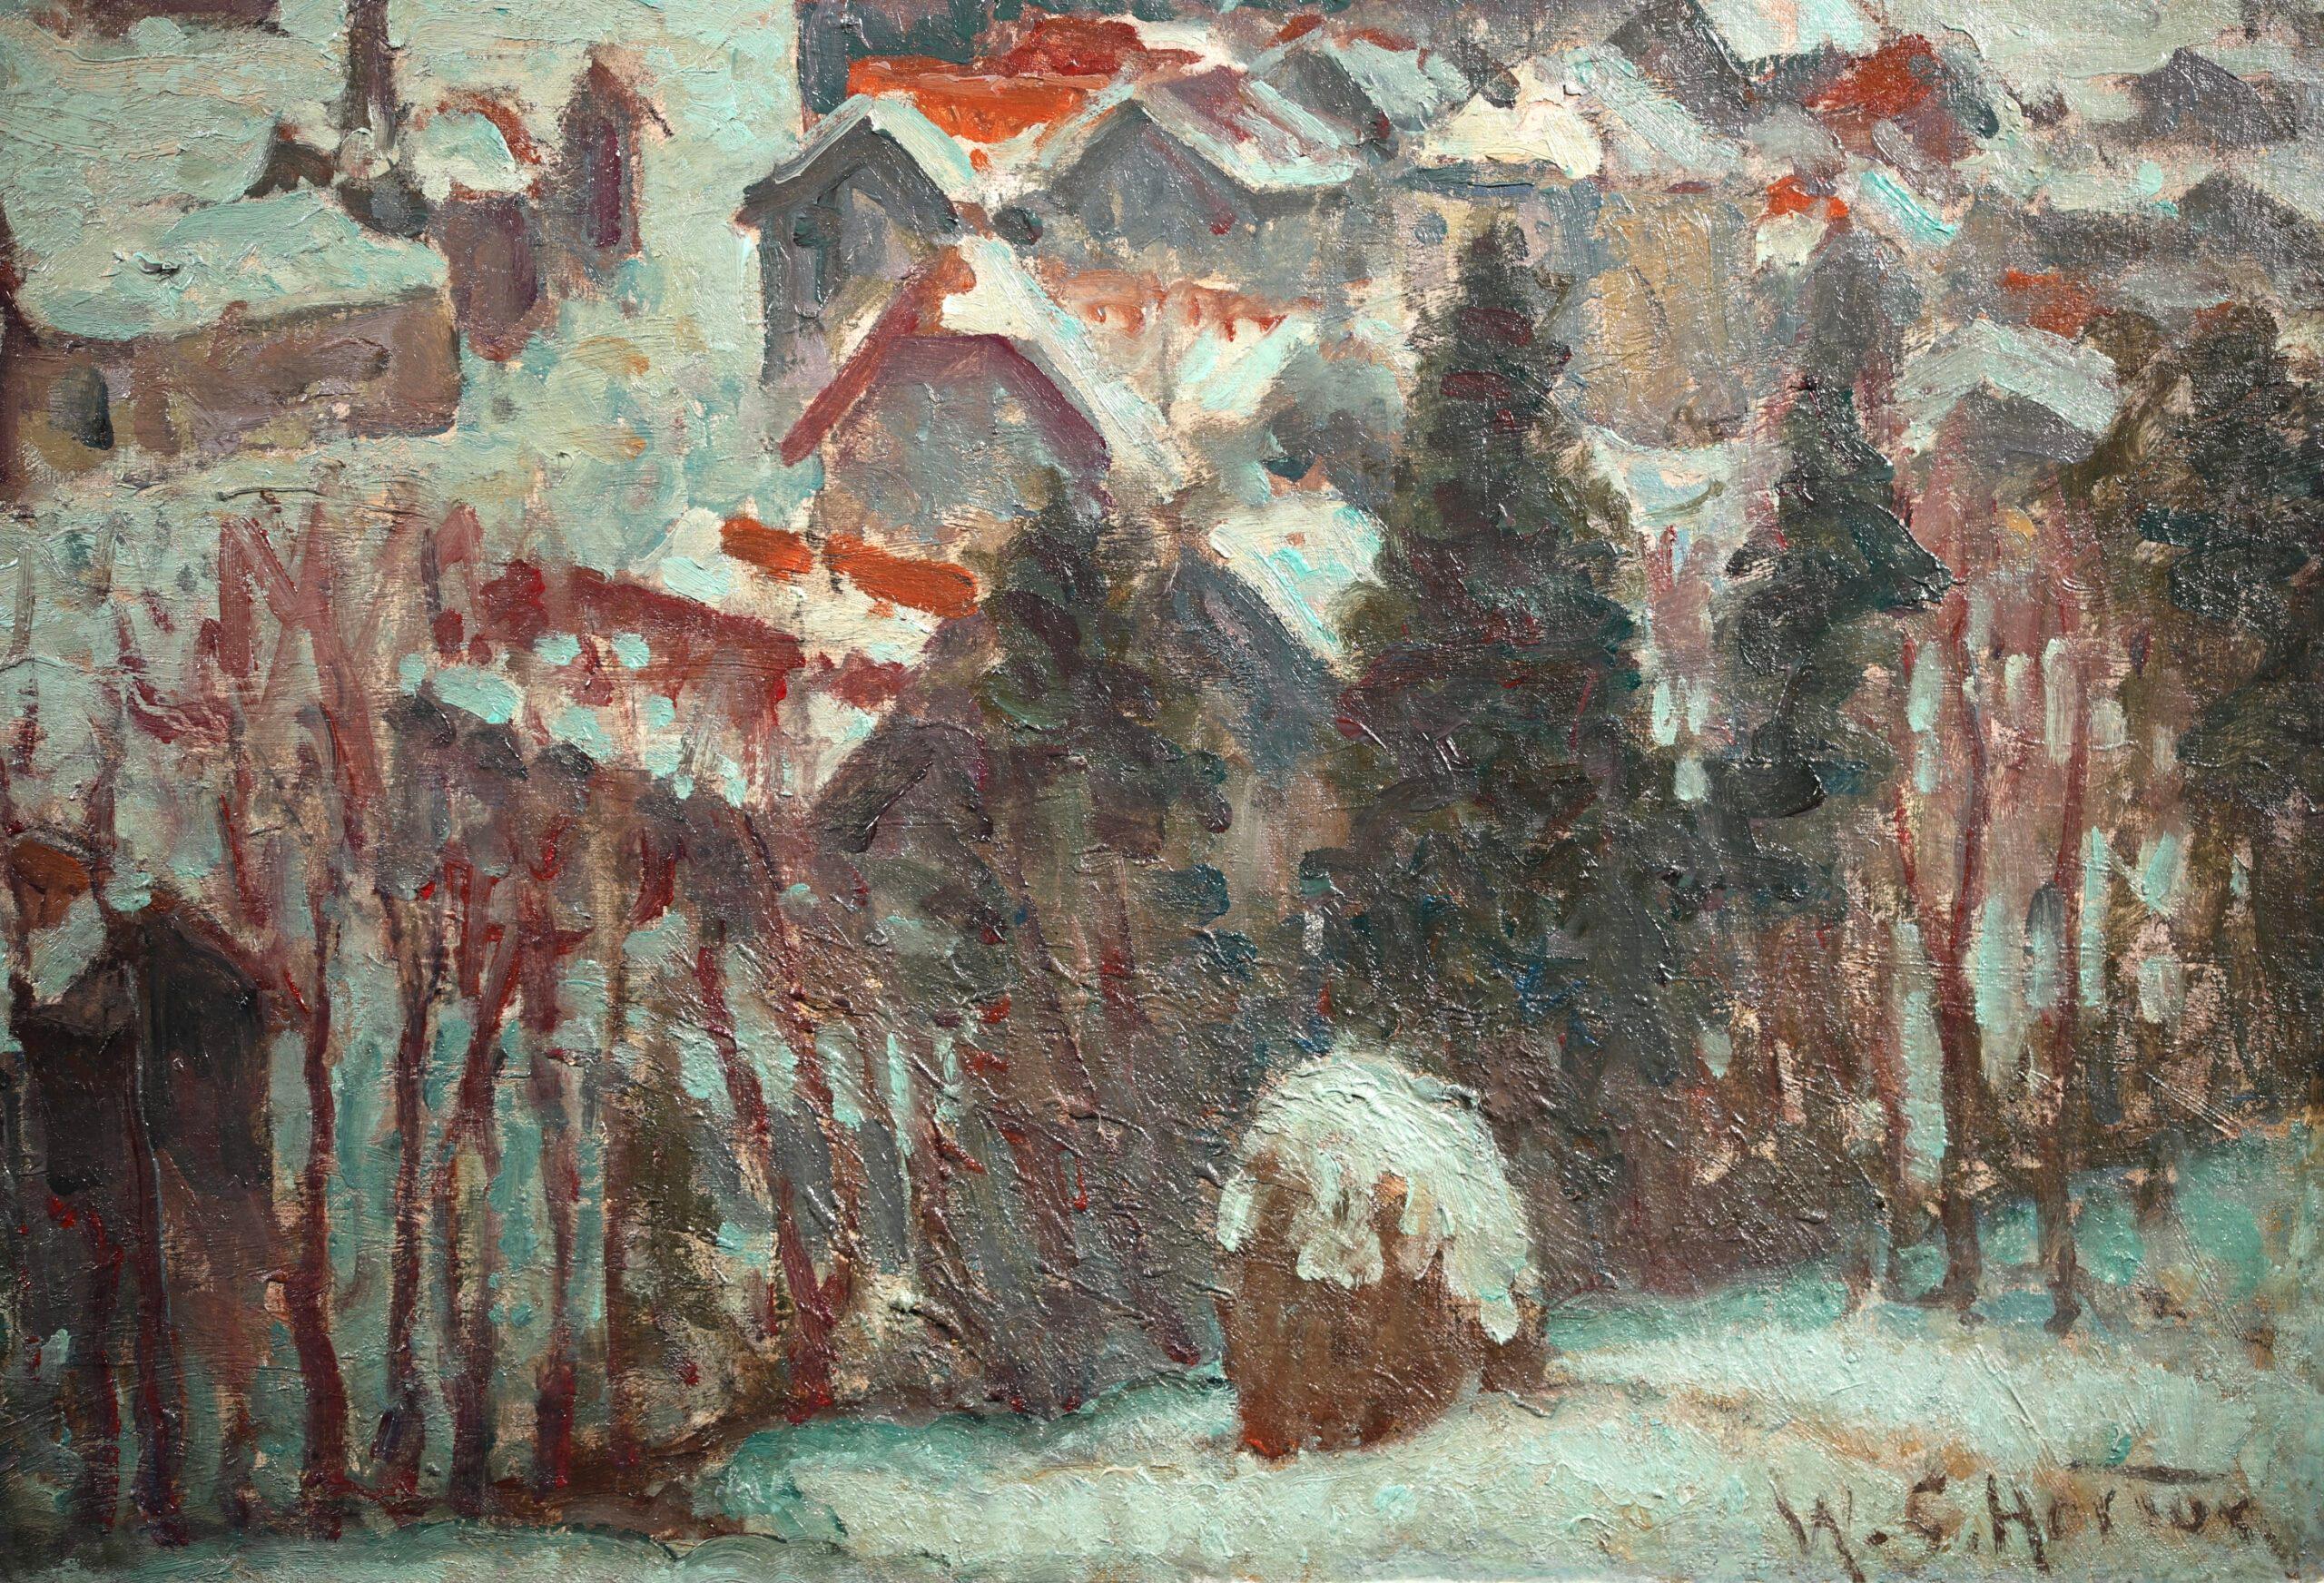 Winter Snow - Gstaad - Impressionist Landscape Oil by William Samuel Horton For Sale 7